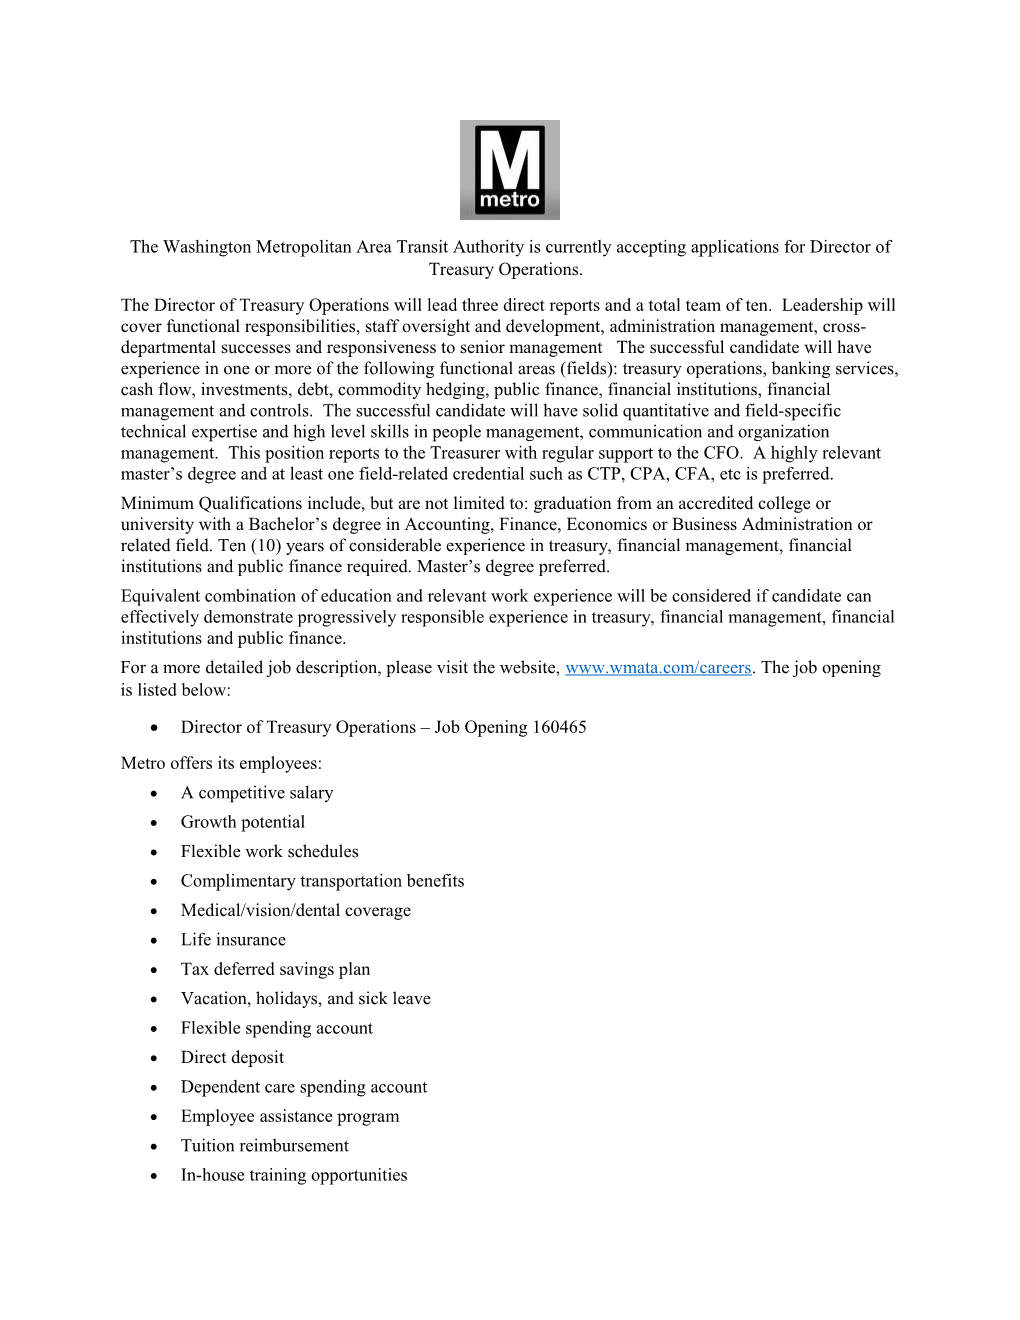 The Washington Metropolitan Area Transit Authority Is Currently Accepting Applications